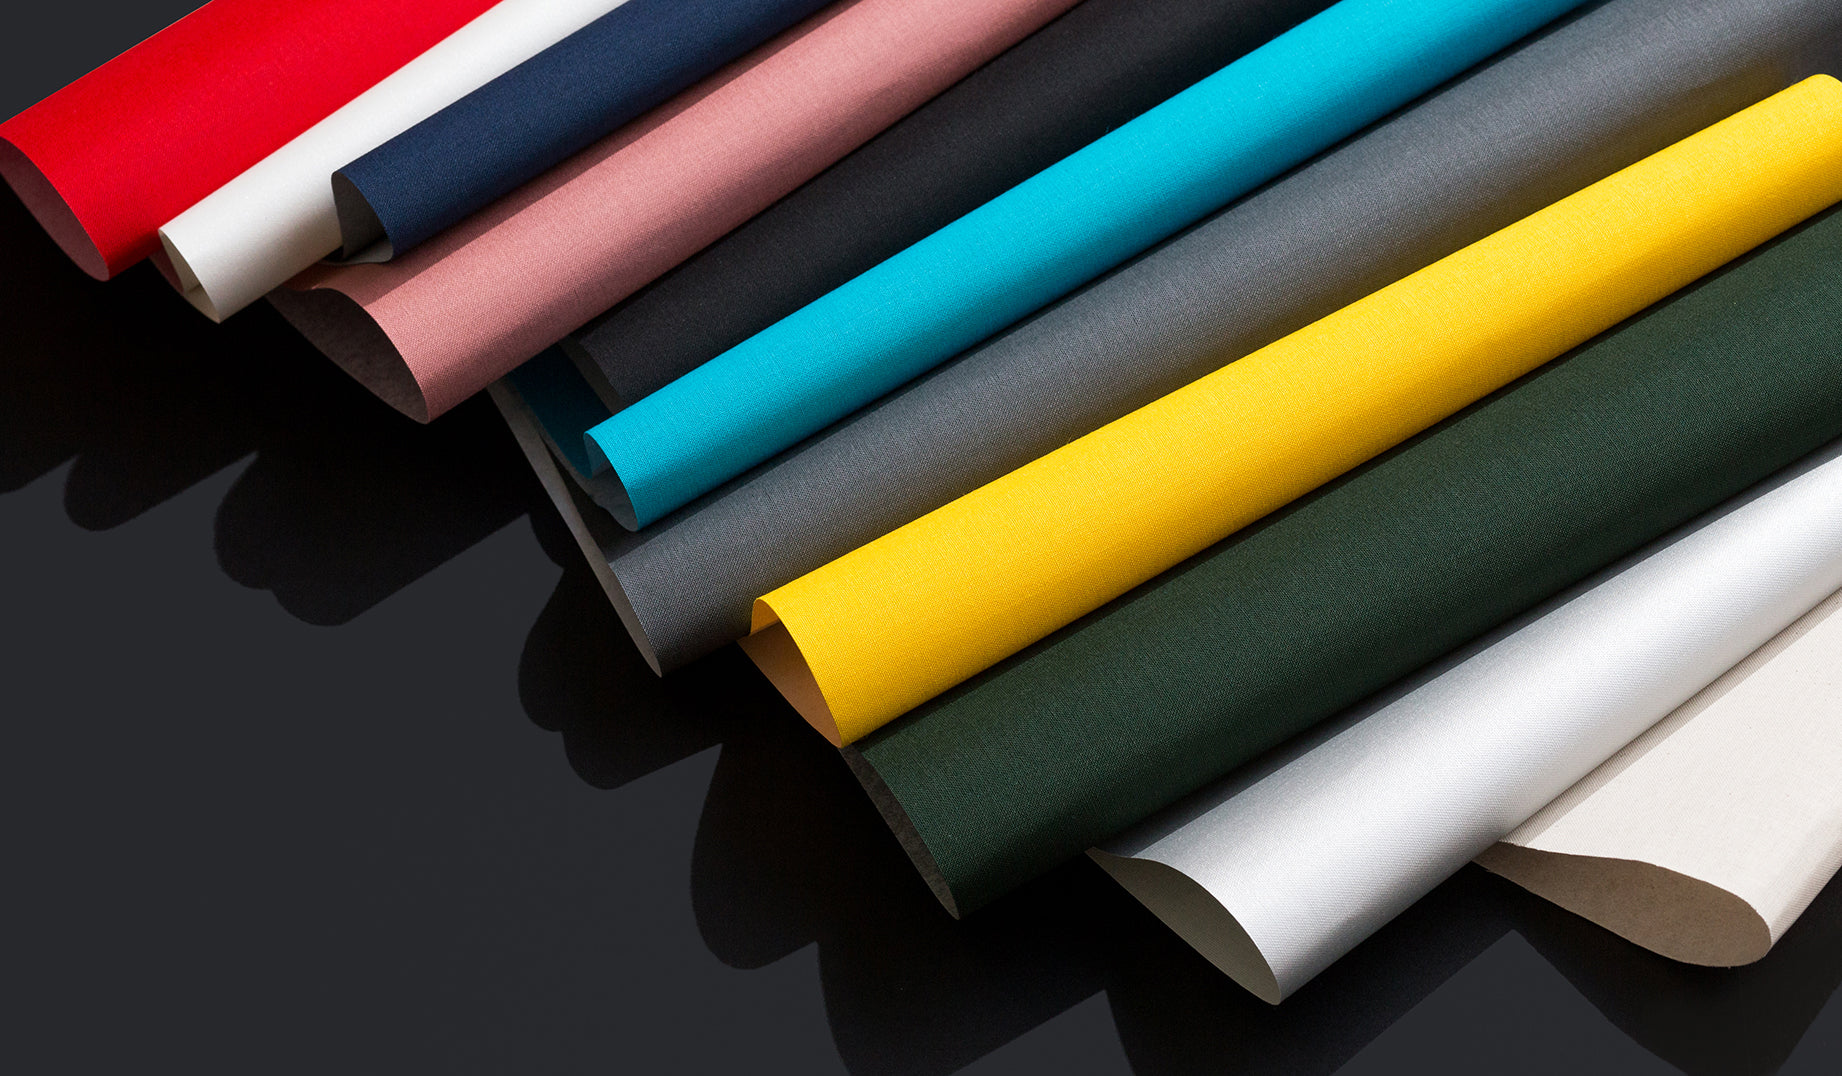 Paper Chase Press uses only premium American-made linen for all of its handmade hardcovers. Choose from black, charcoal gray, royal blue, or natural white.  